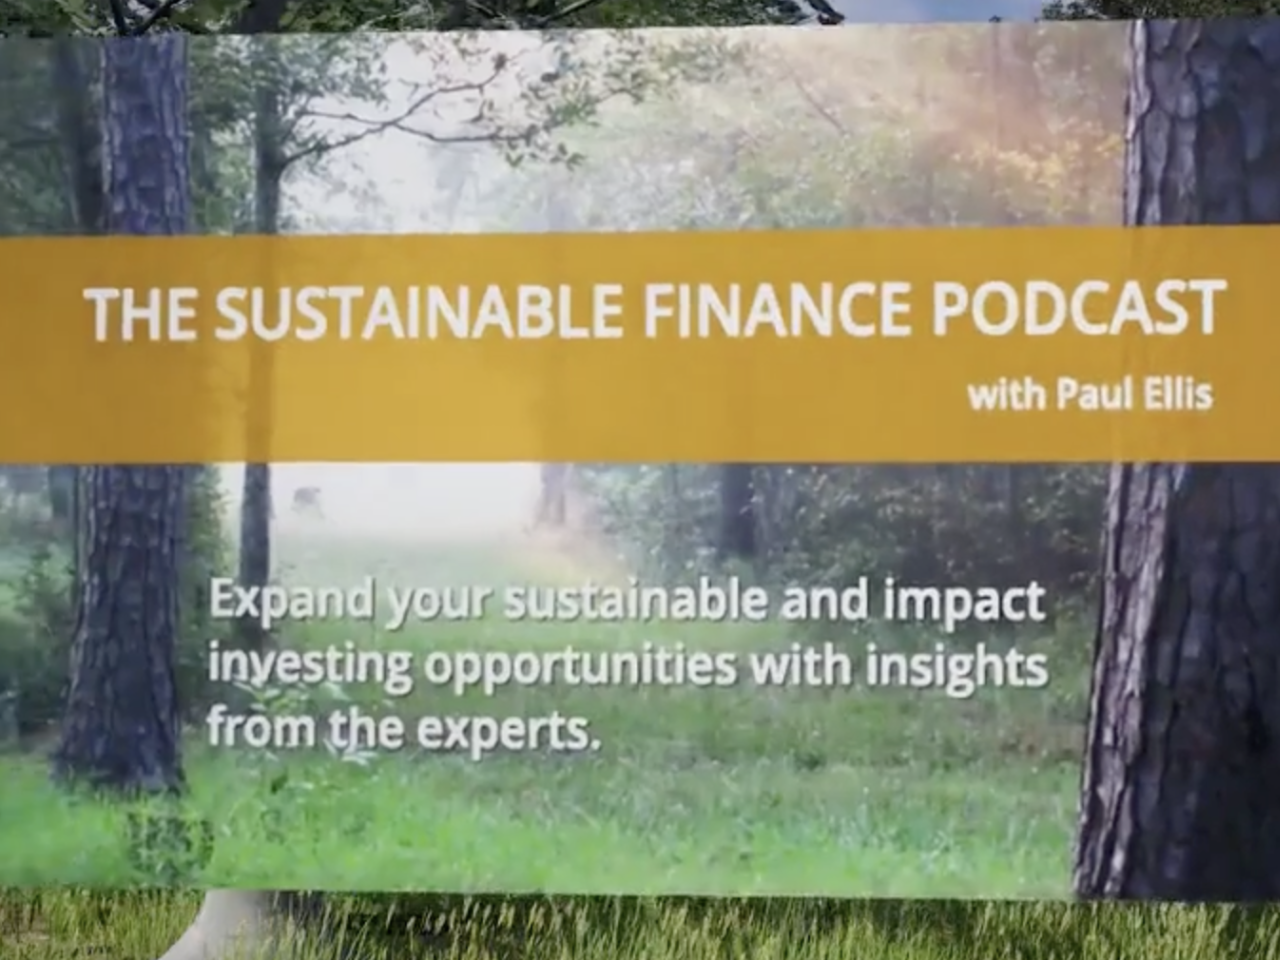 "sustainable finance podcast with Paul Ellis"